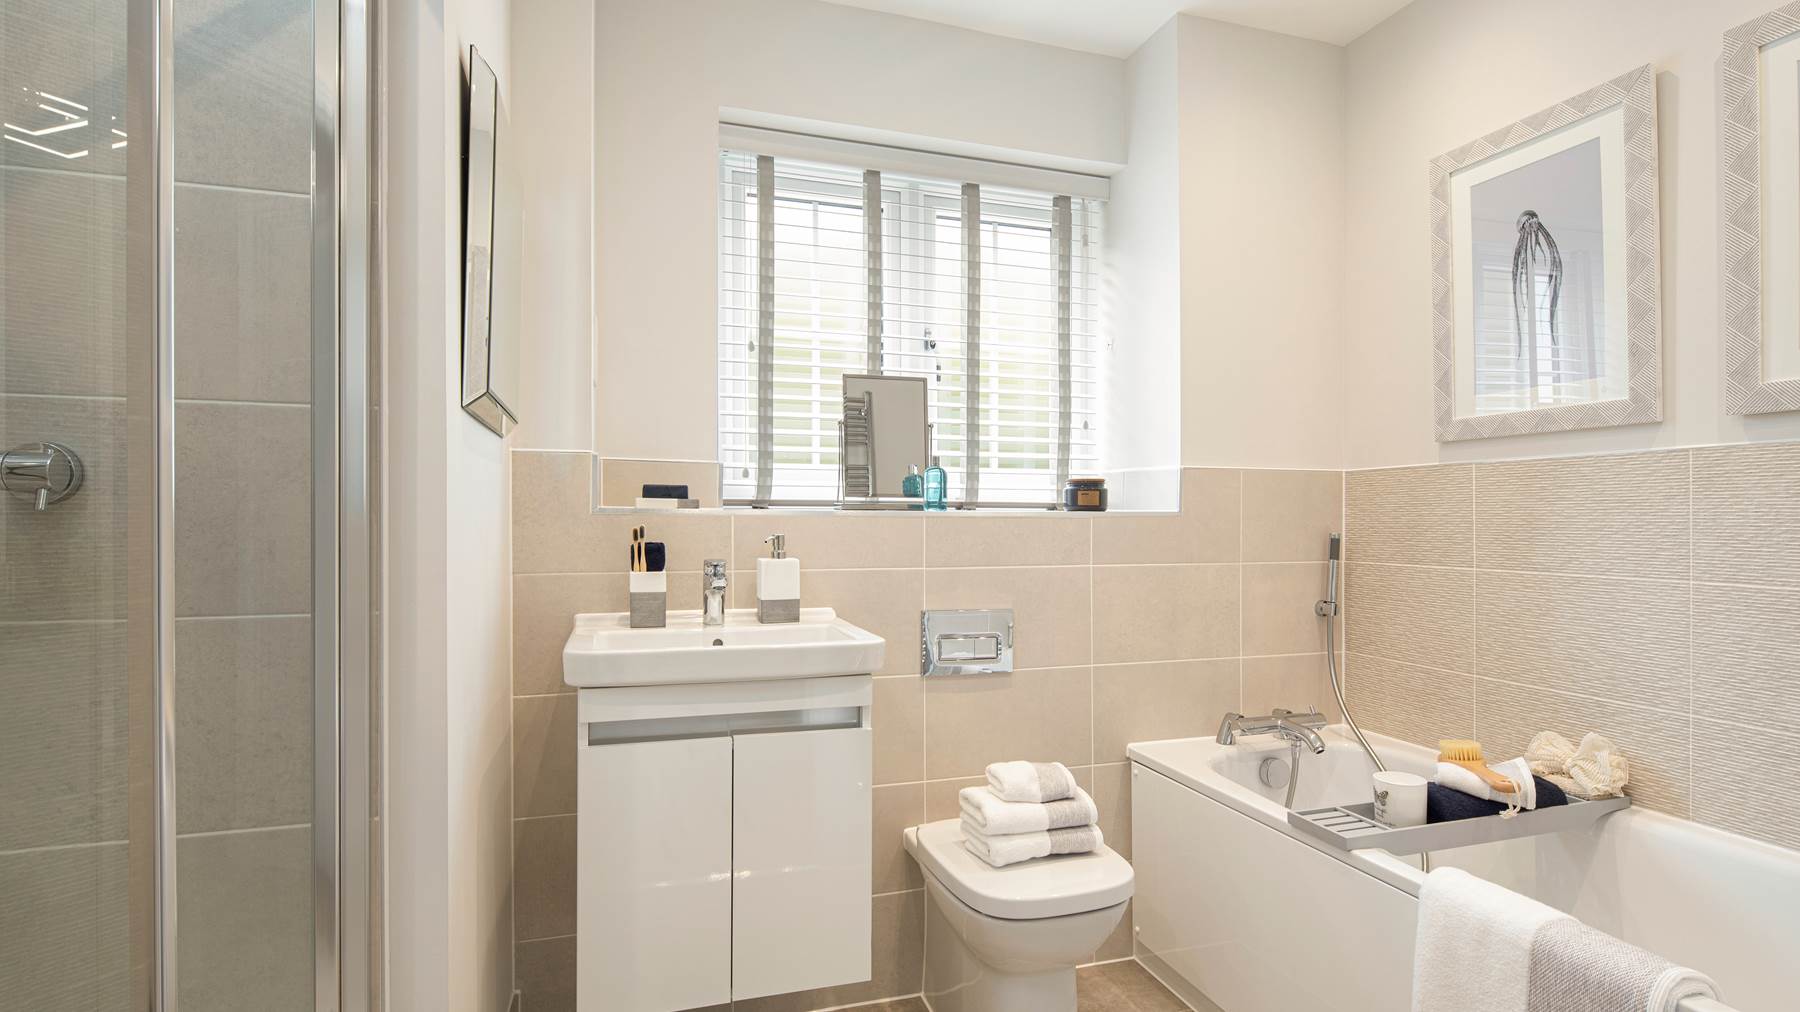 Bathroom of house for sale in Alton, Hampshire